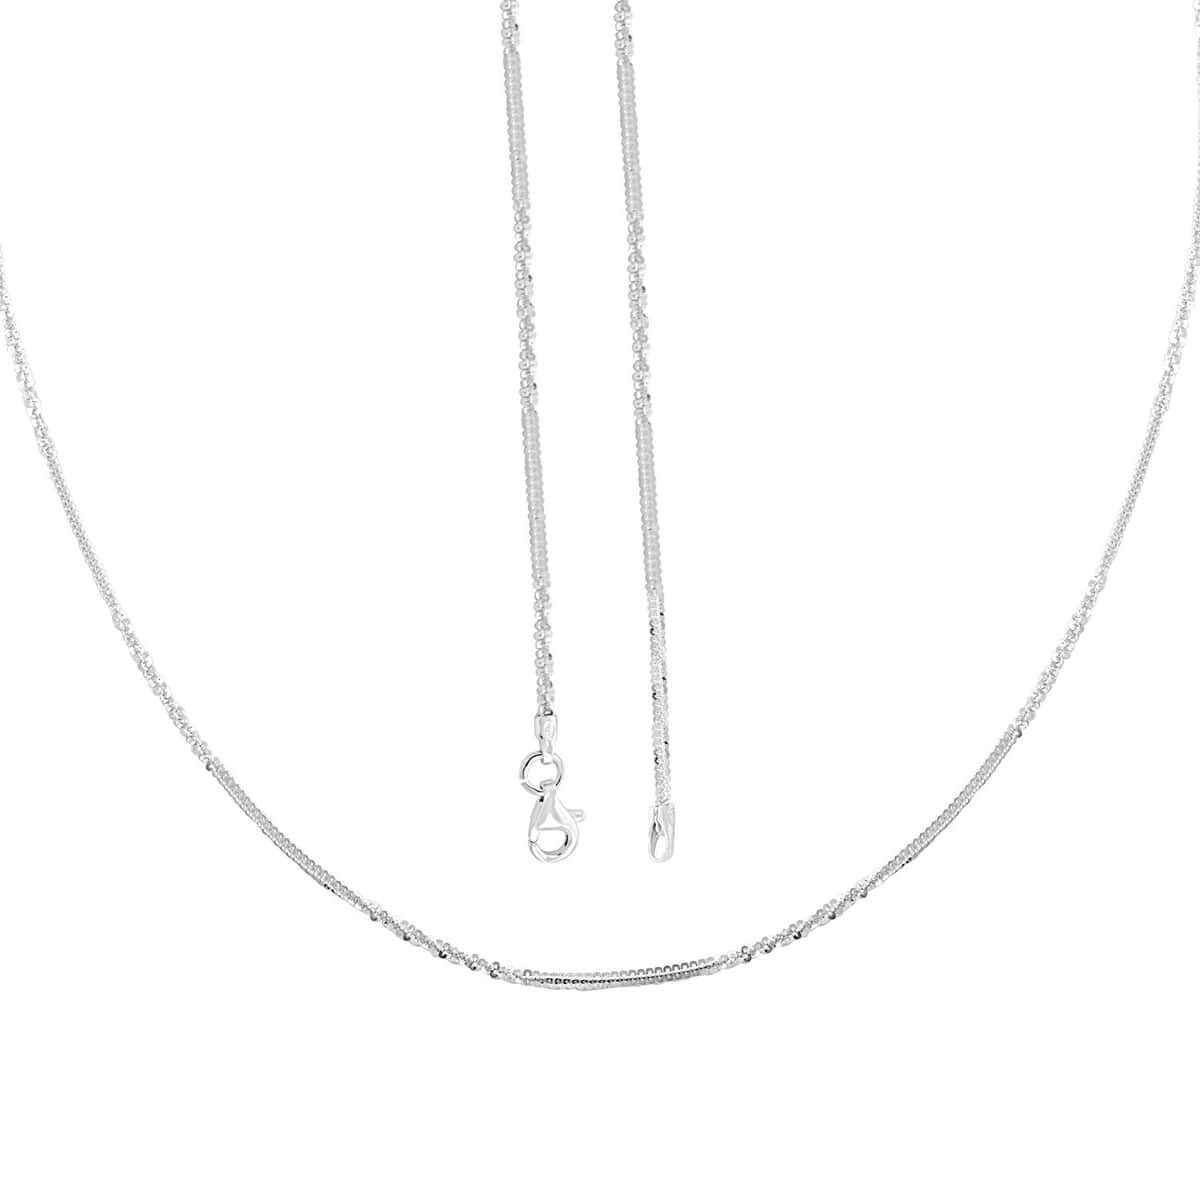 Italian Chain at 4.90 Alternate Necklace Sterling 24 Inches Grams Silver Buy Margherita